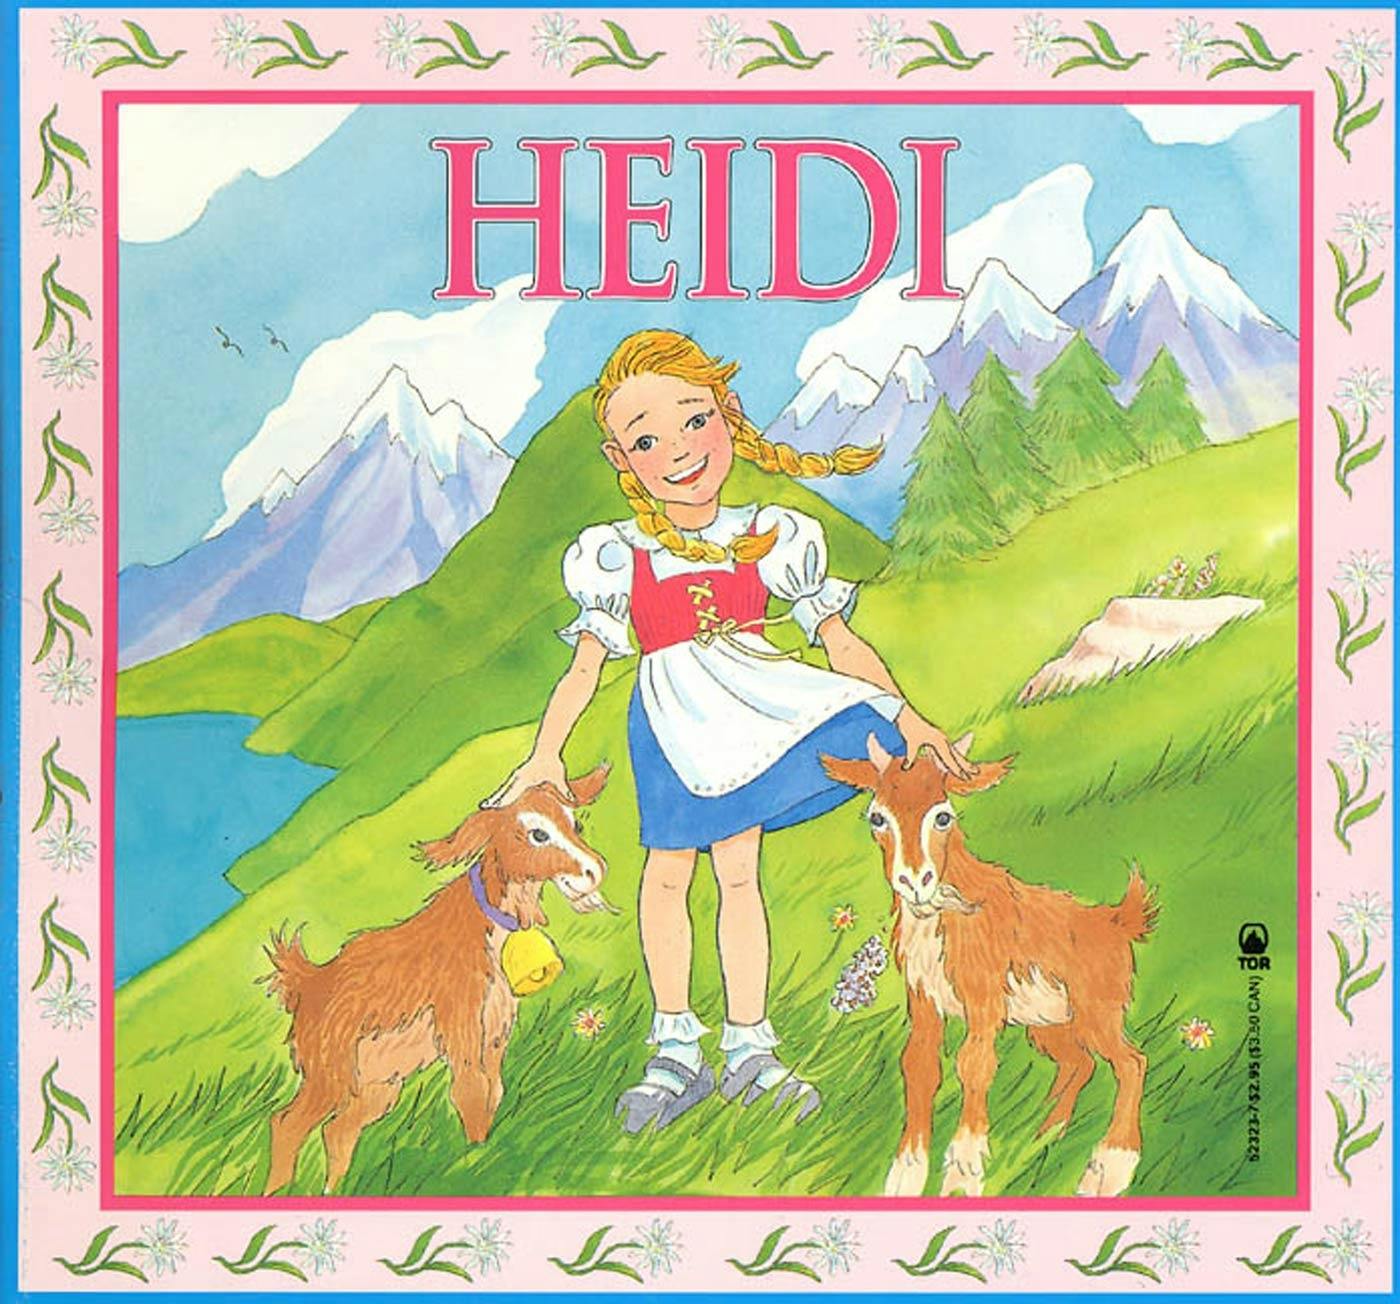 Cover for the book titled as: Heidi